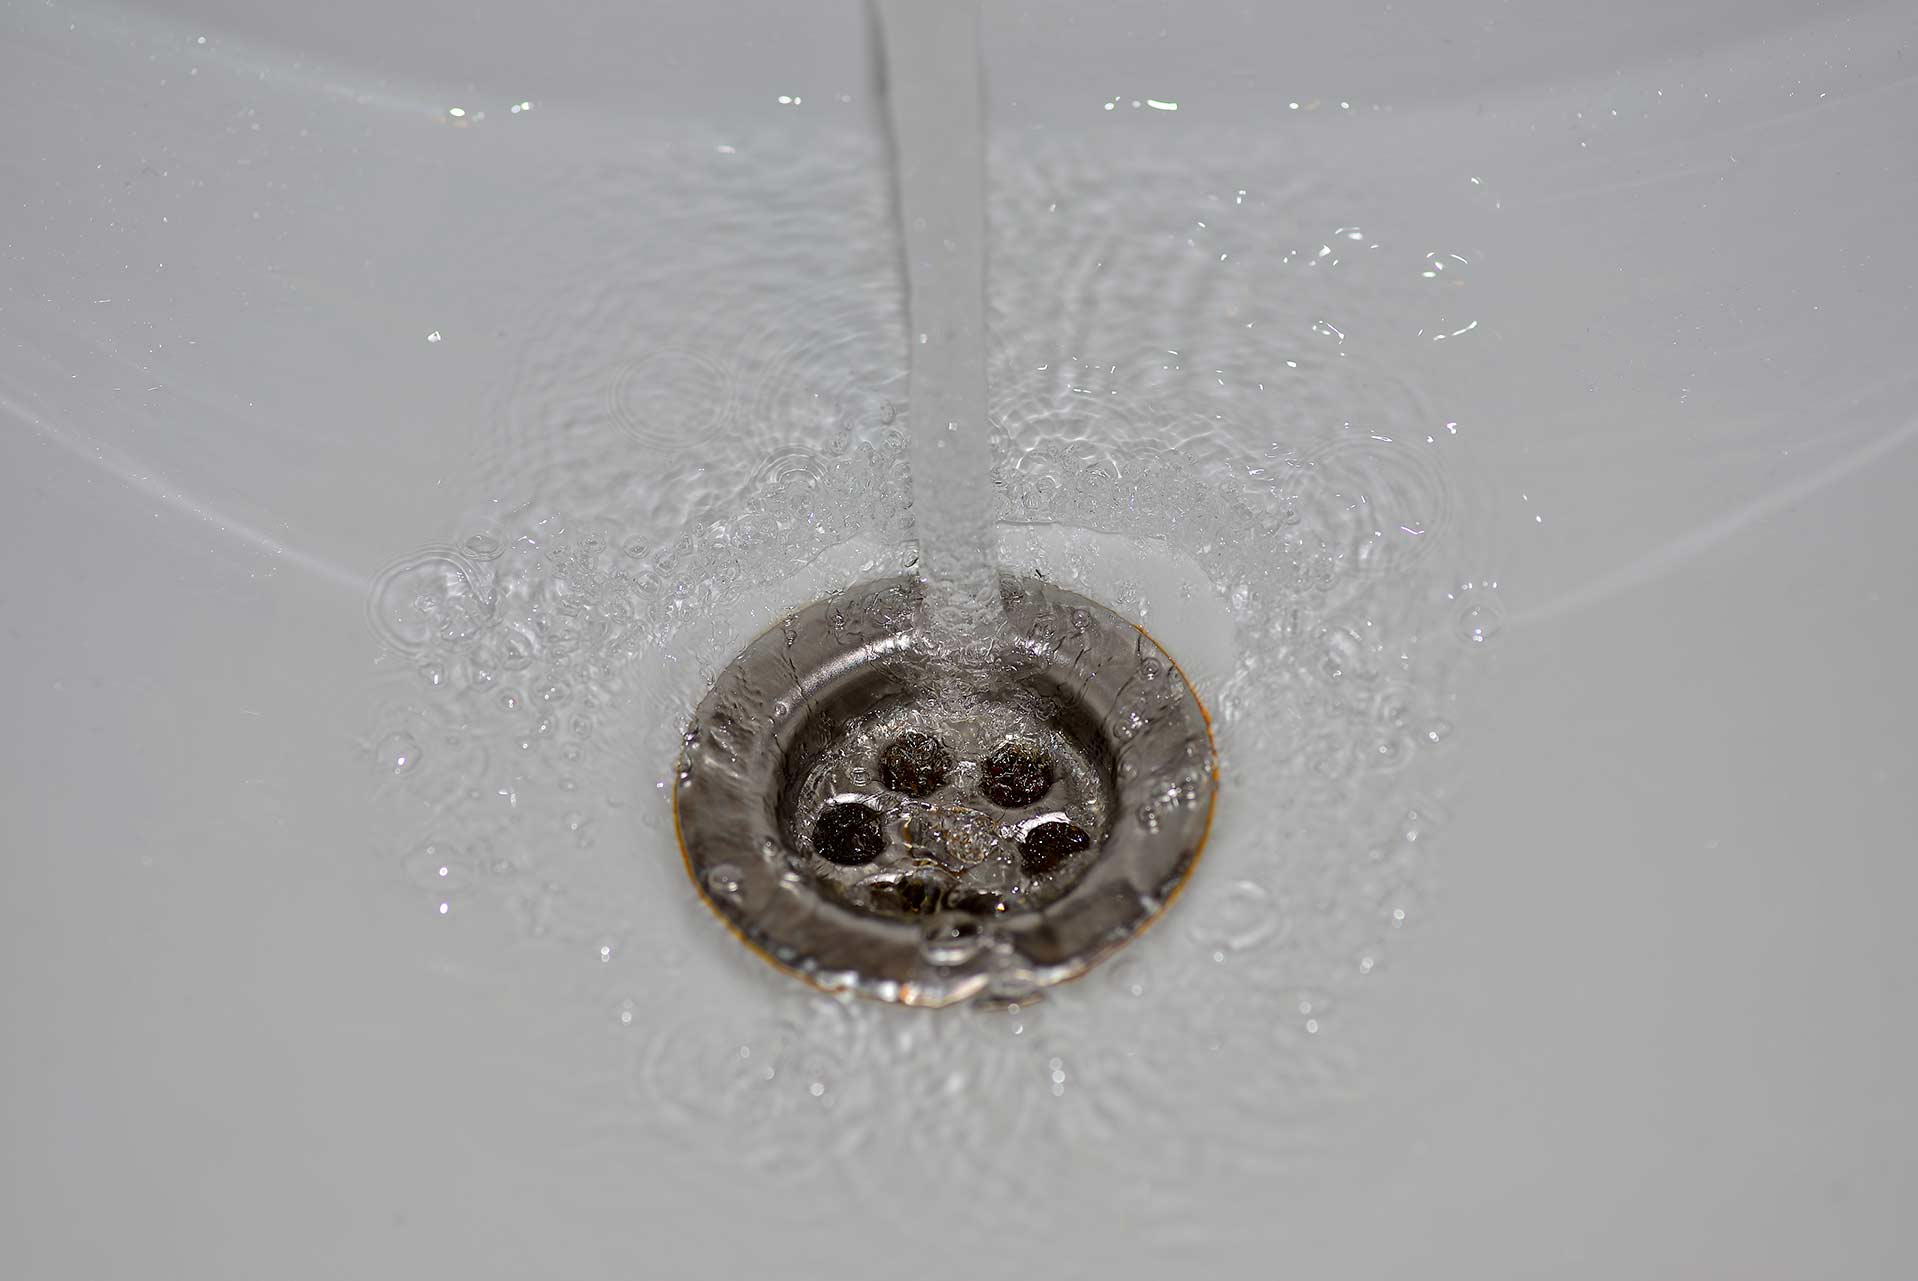 A2B Drains provides services to unblock blocked sinks and drains for properties in Newbury Park.